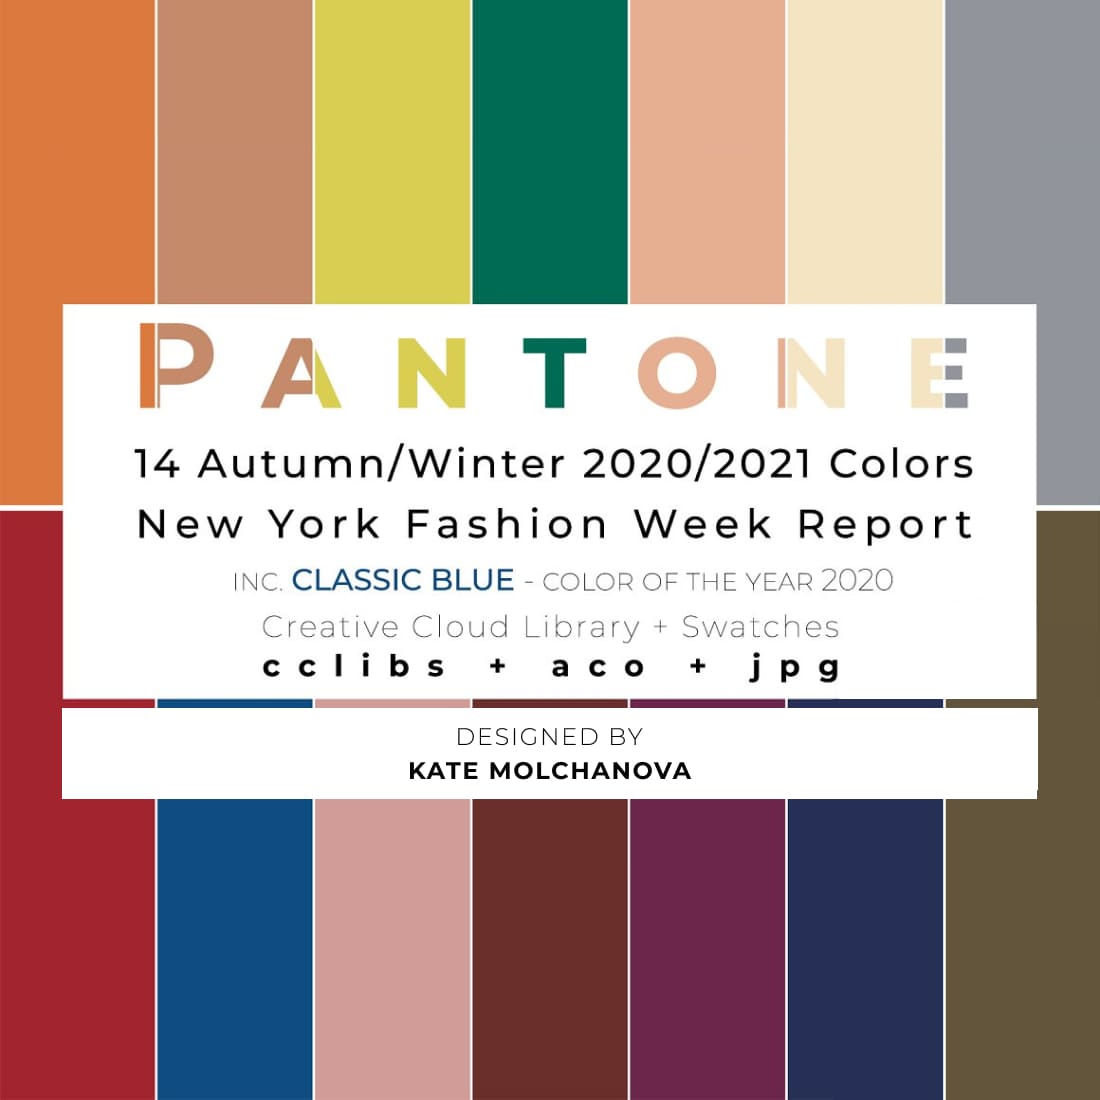 14 pantone nyfw aw 2020 21 palette cover image.